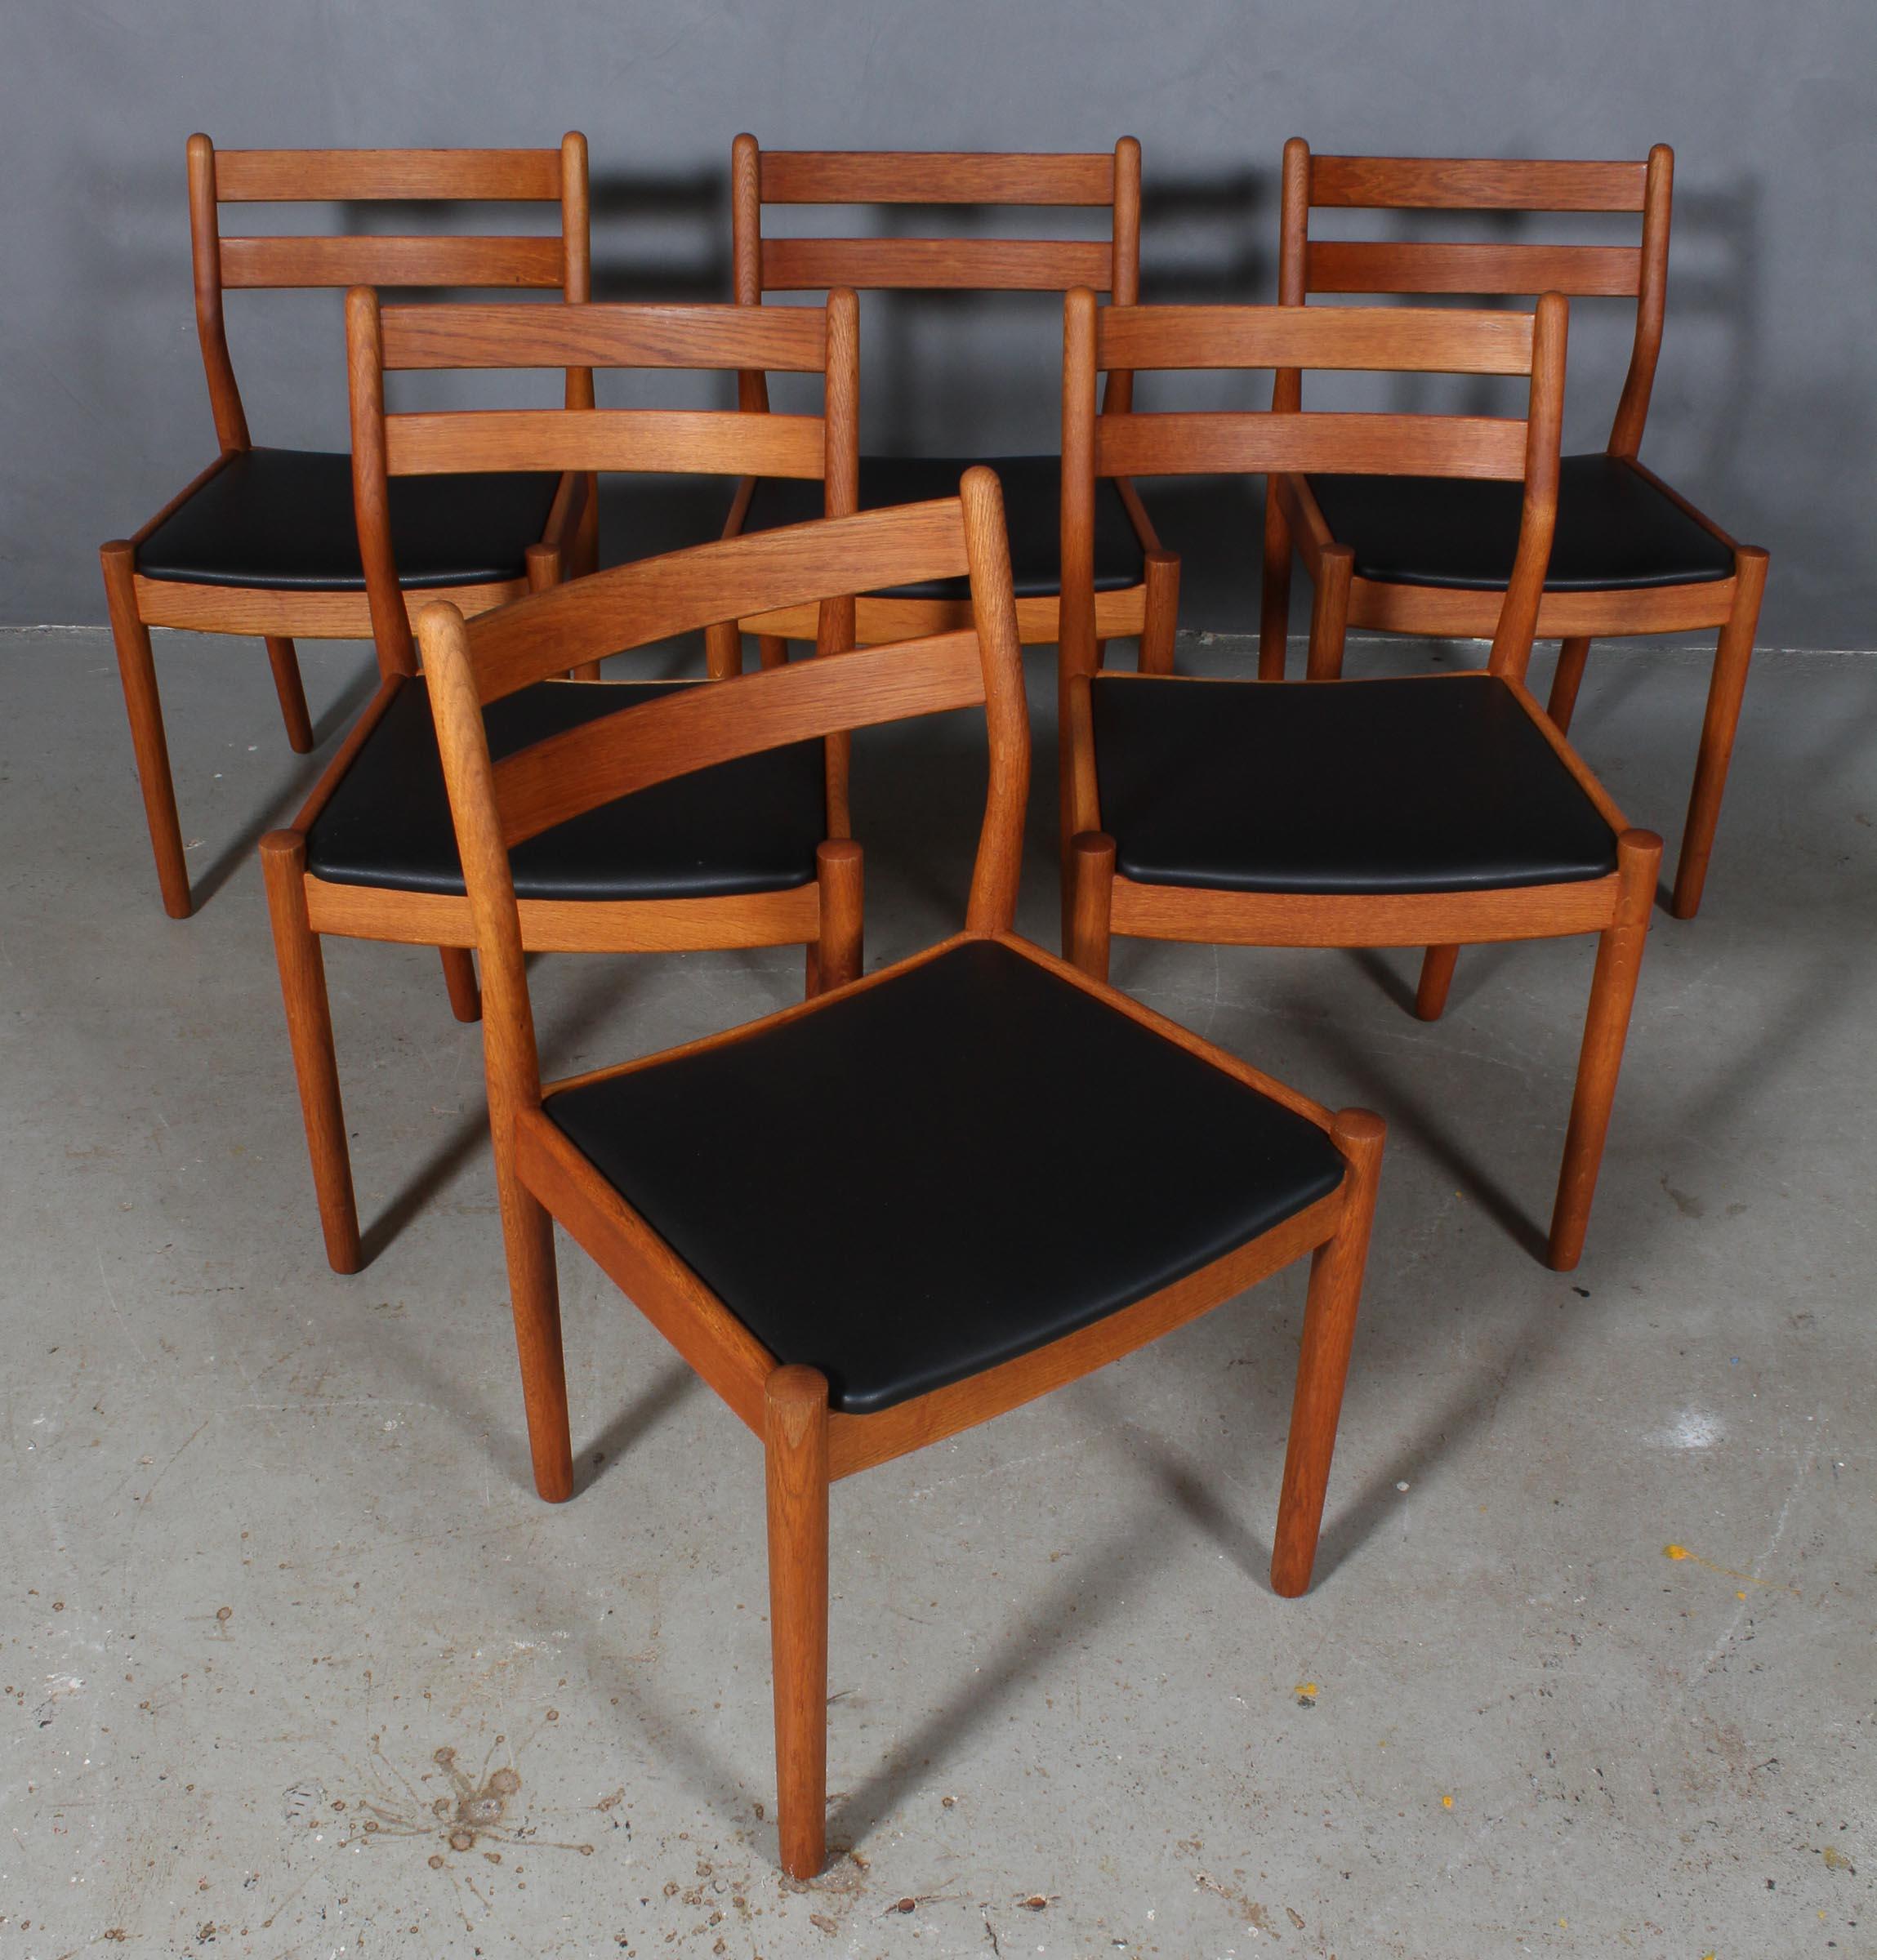 Set of six dining chairs by Poul Volther with frame of oak.

New upholstered cushions with black aniline leather.

Made by FDB, model J61.